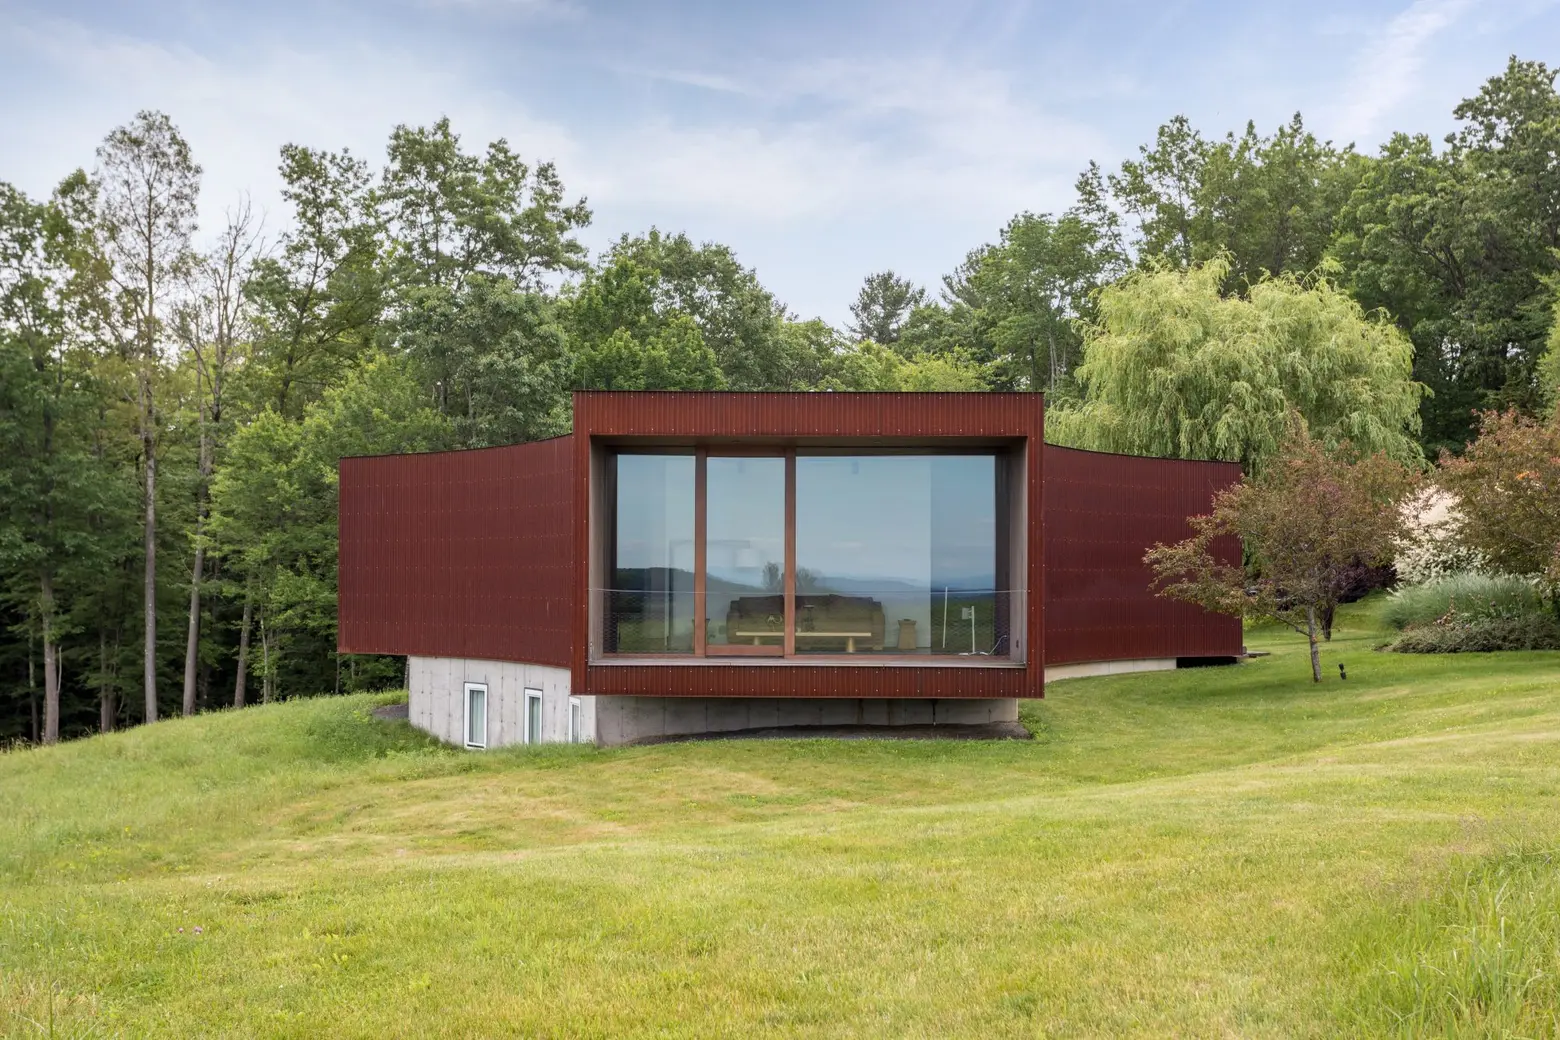 Designed by Ai Weiwei, this $5.25M upstate retreat is perfect for art lovers